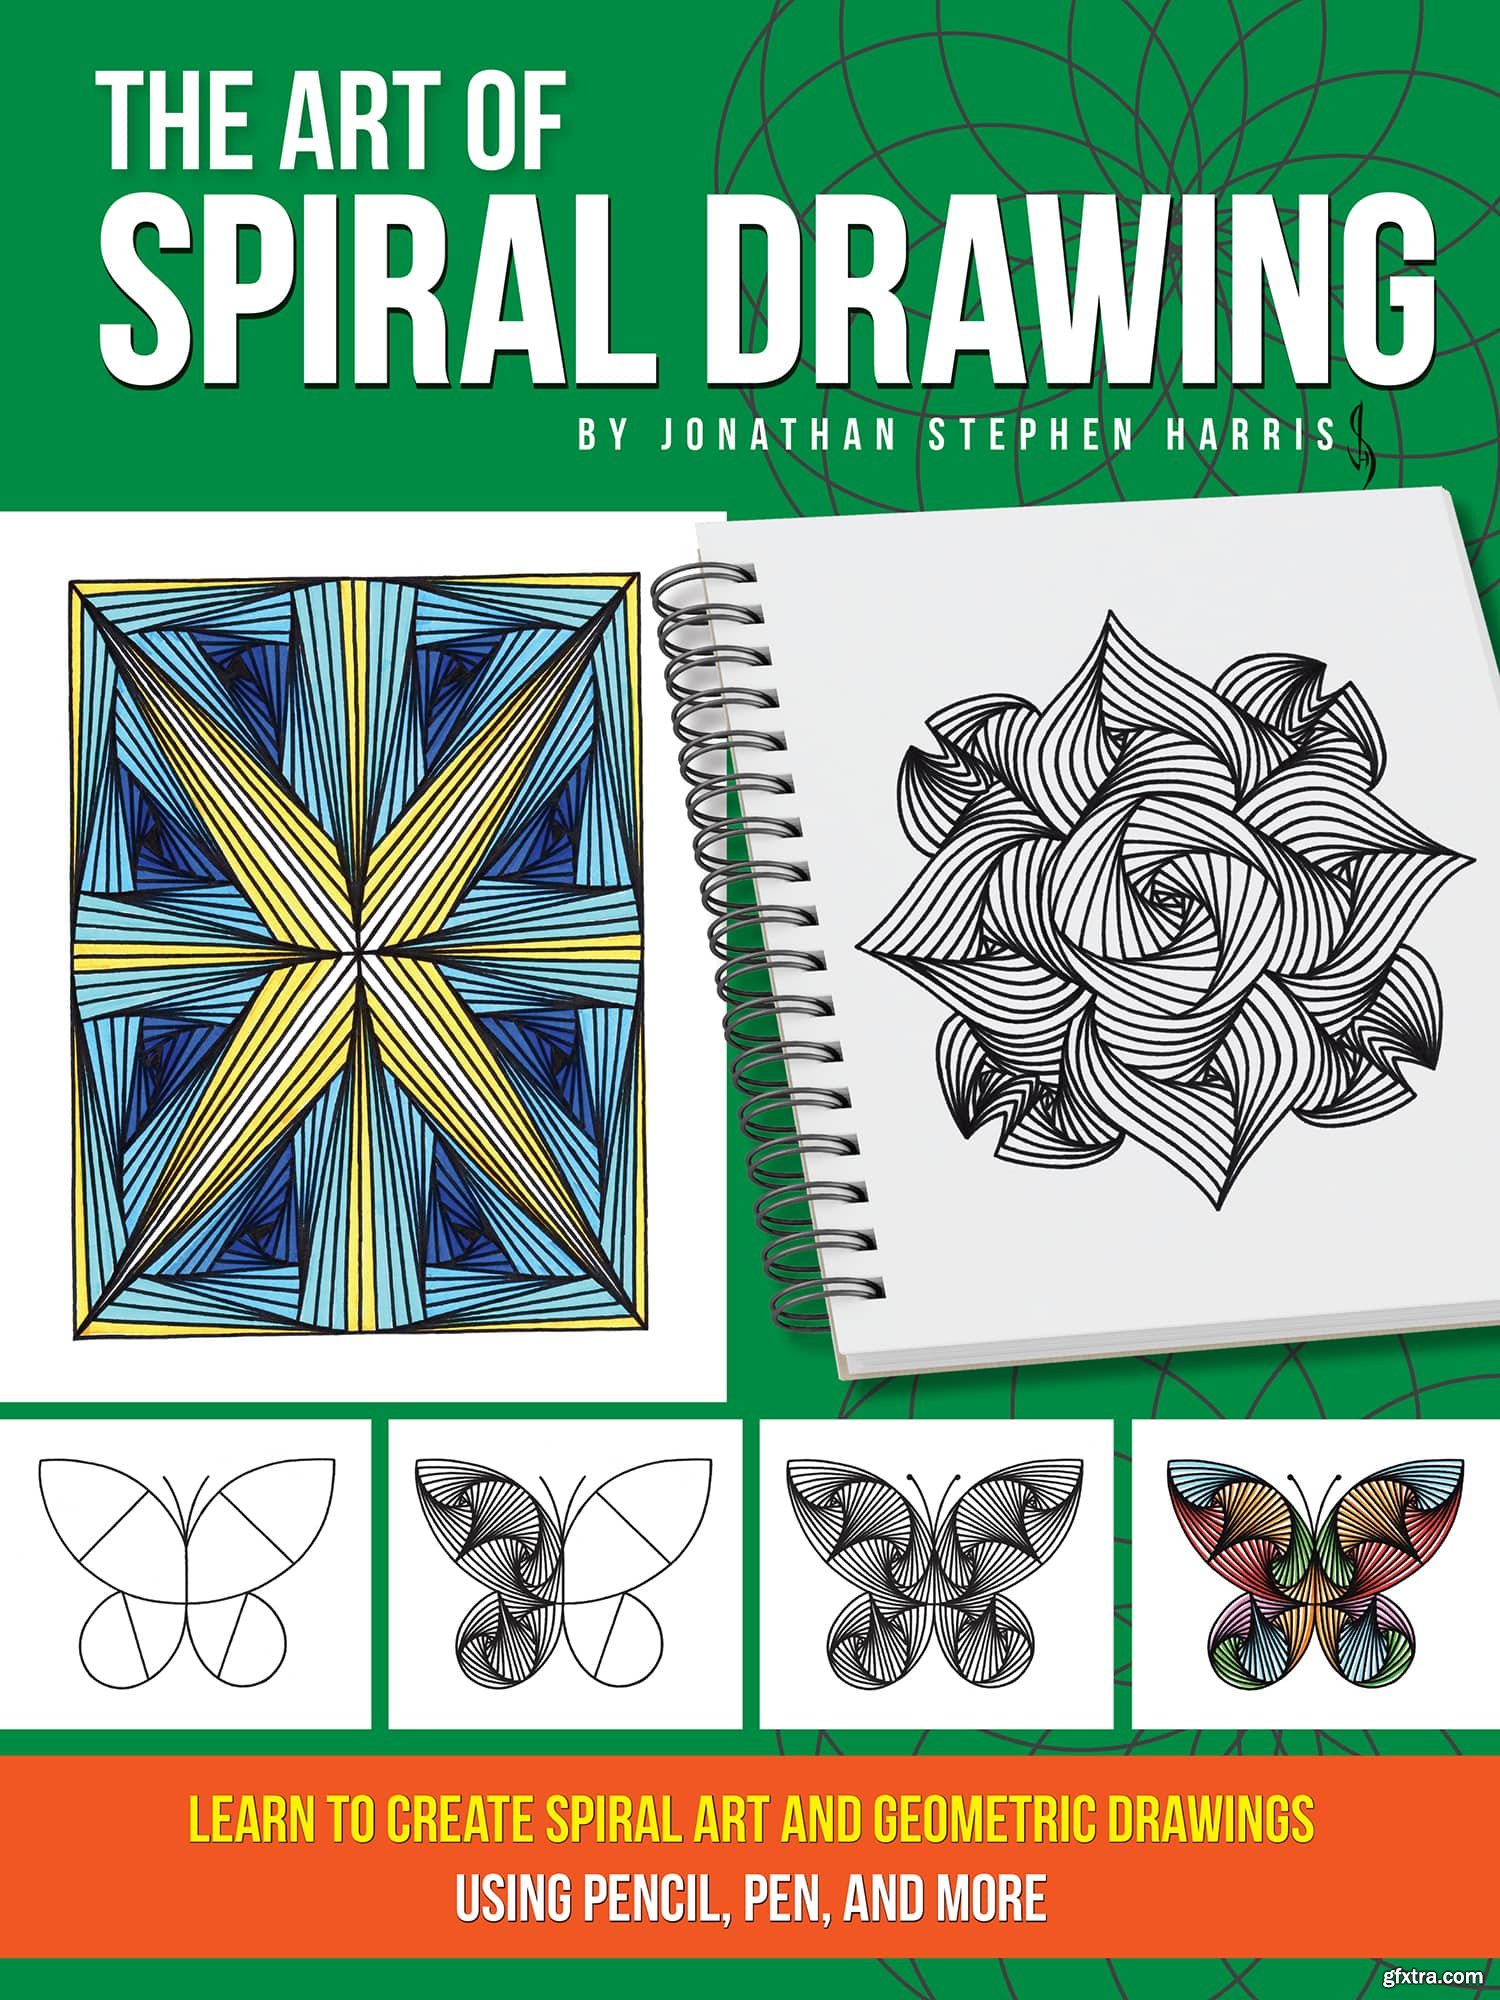 The Art of Spiral Drawing Learn to create spiral art and geometric